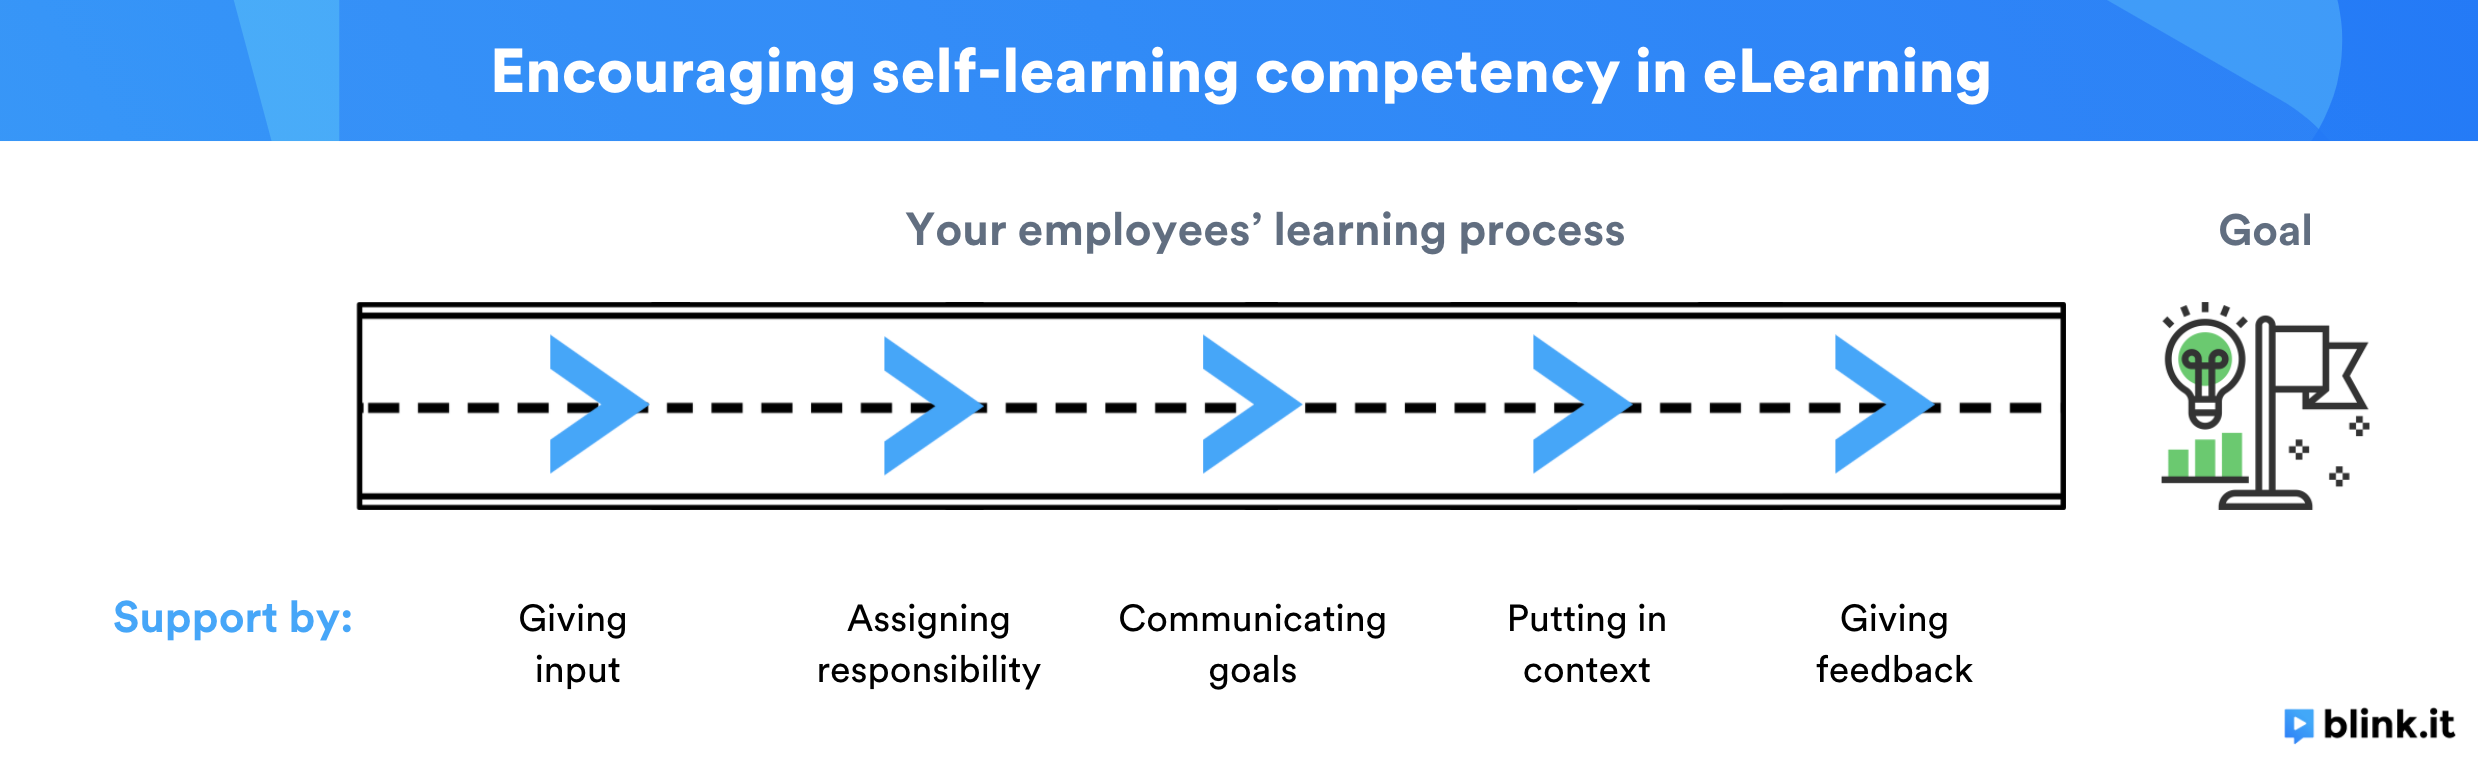 graphic_encouraging_self_learning_competency